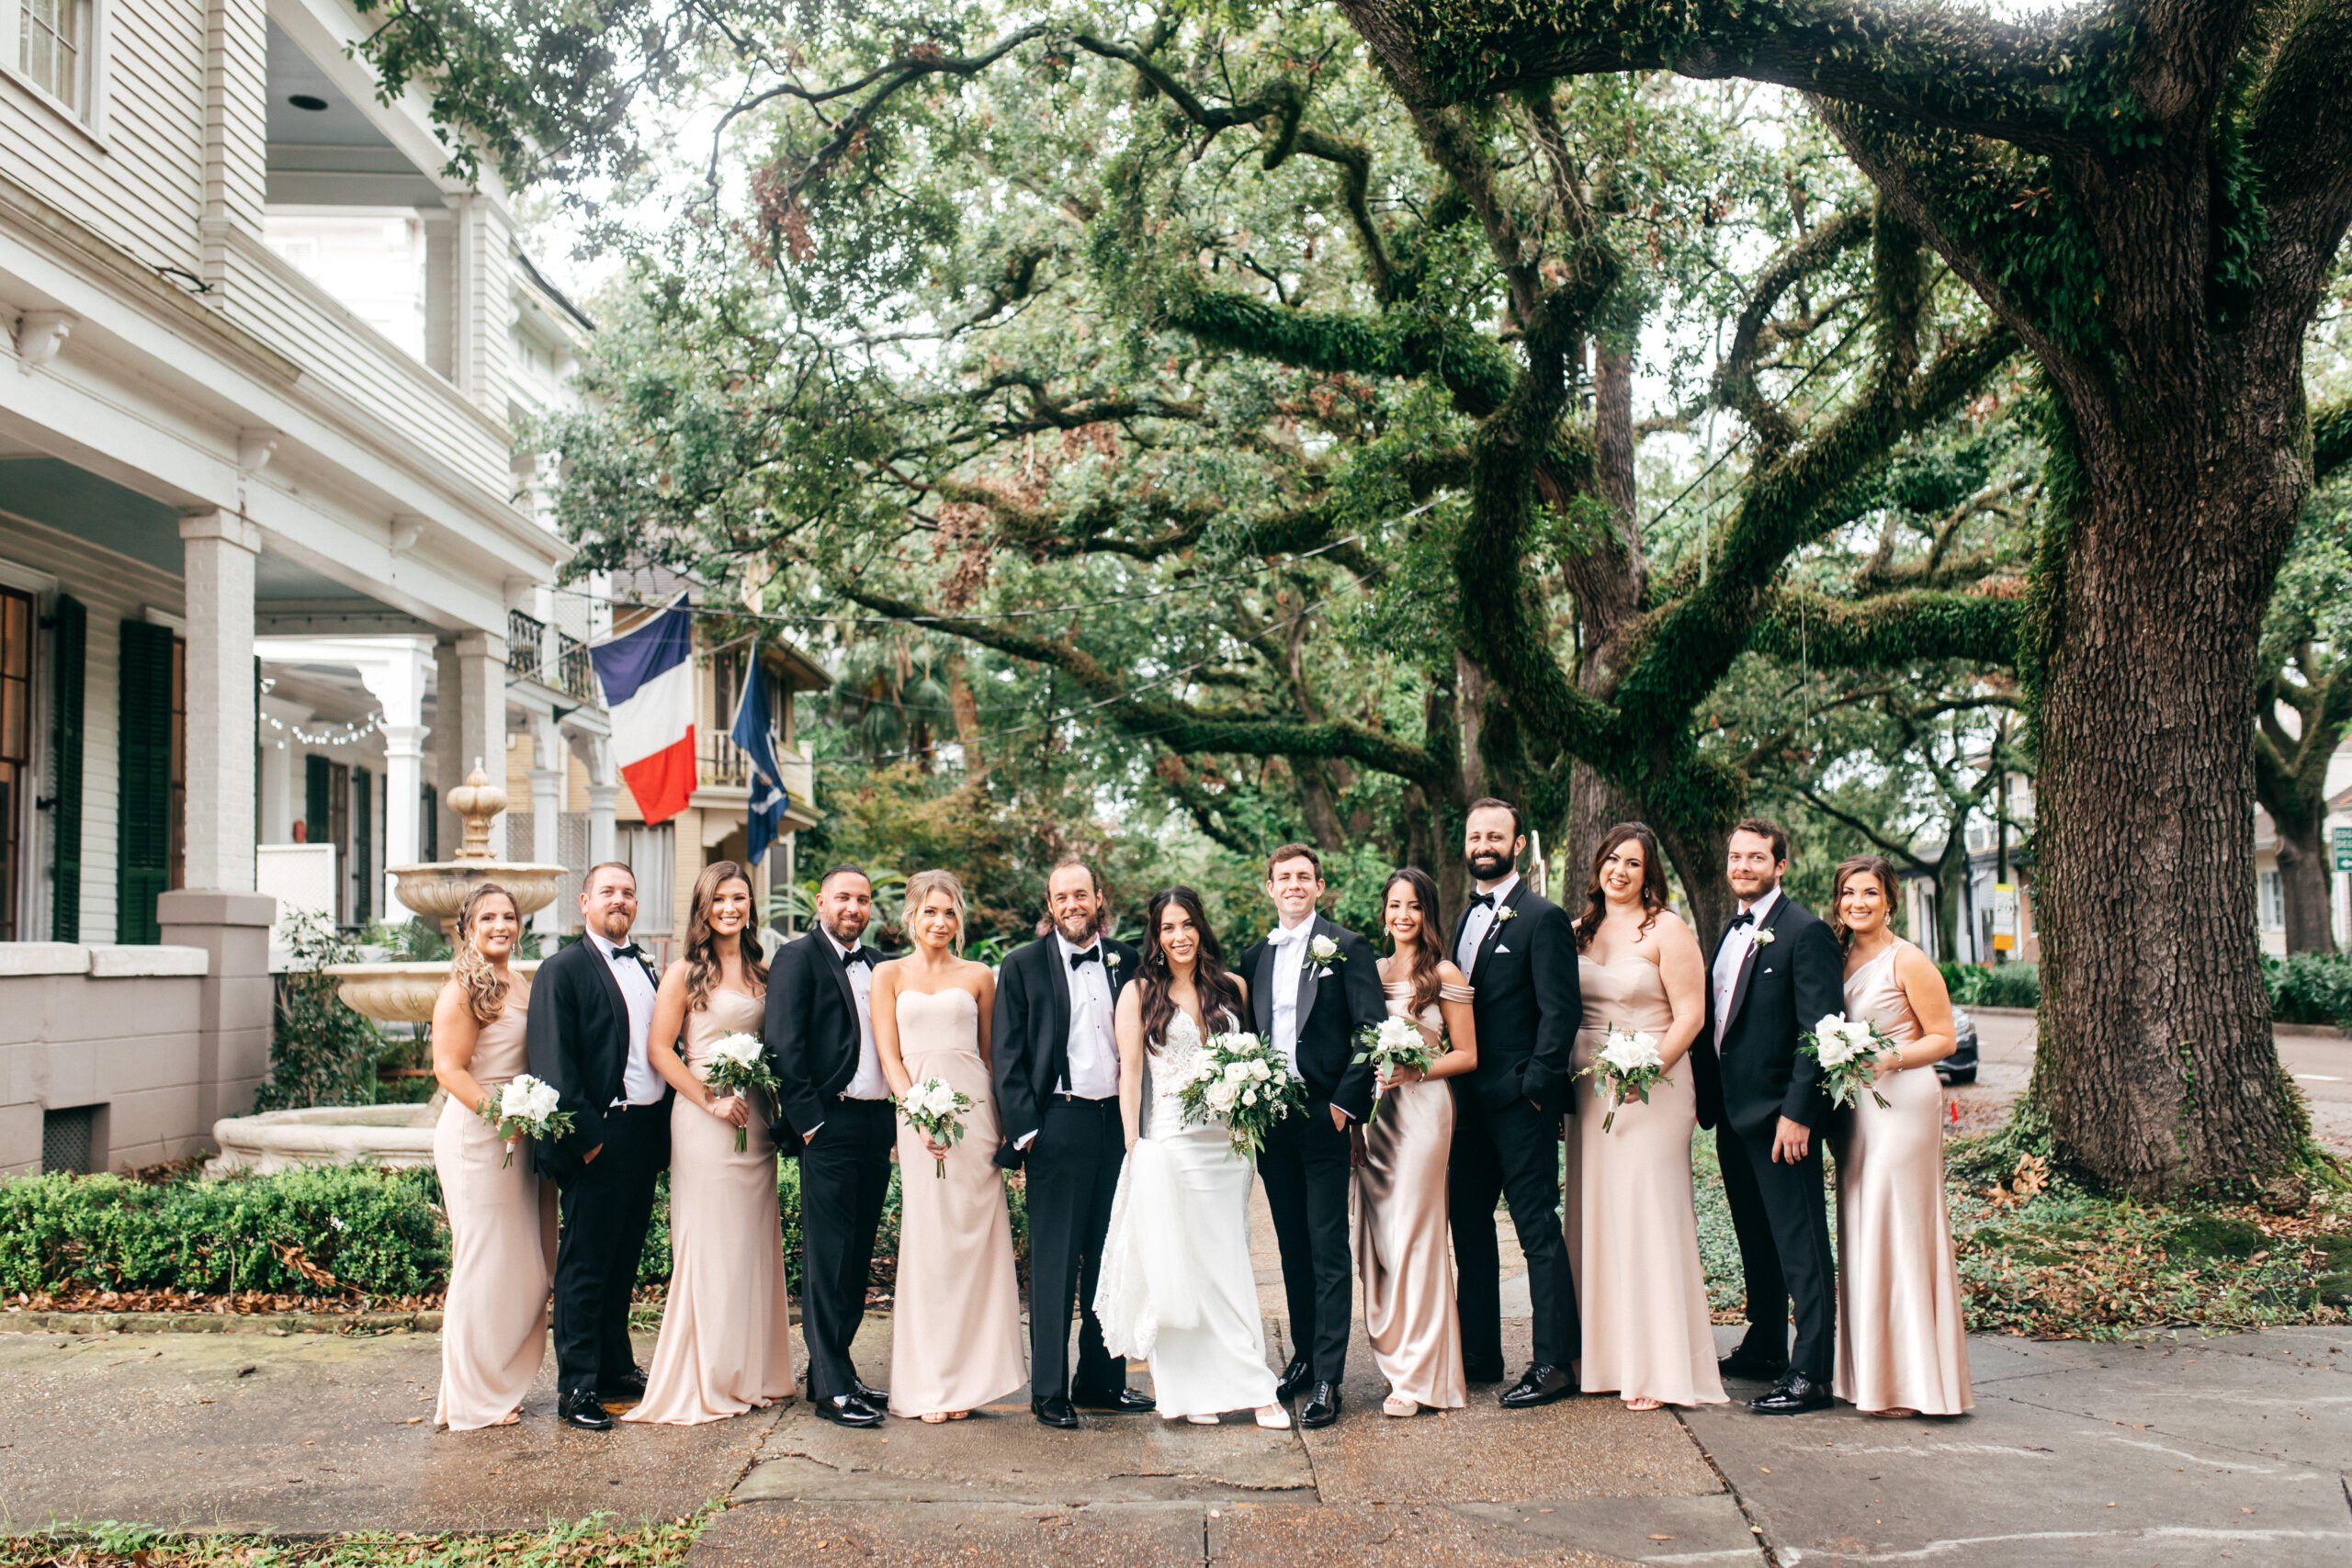 New Orleans wedding venue, weather in new orleans, best time to get married in new orleans.